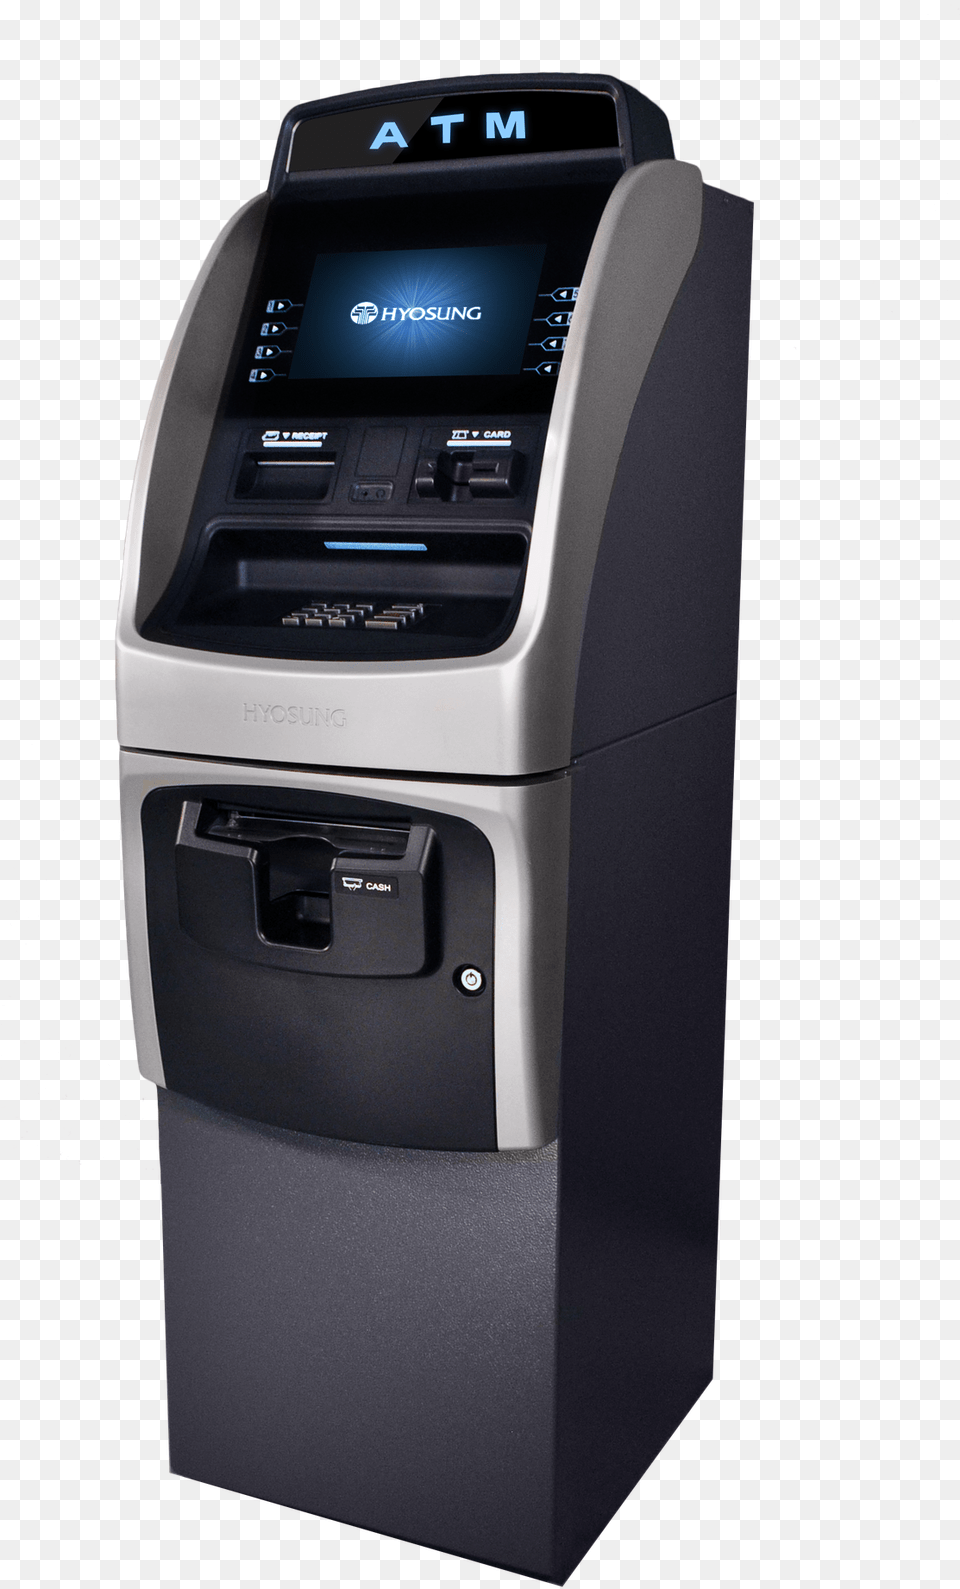 Atm Machine Image Background Atm Machines Png